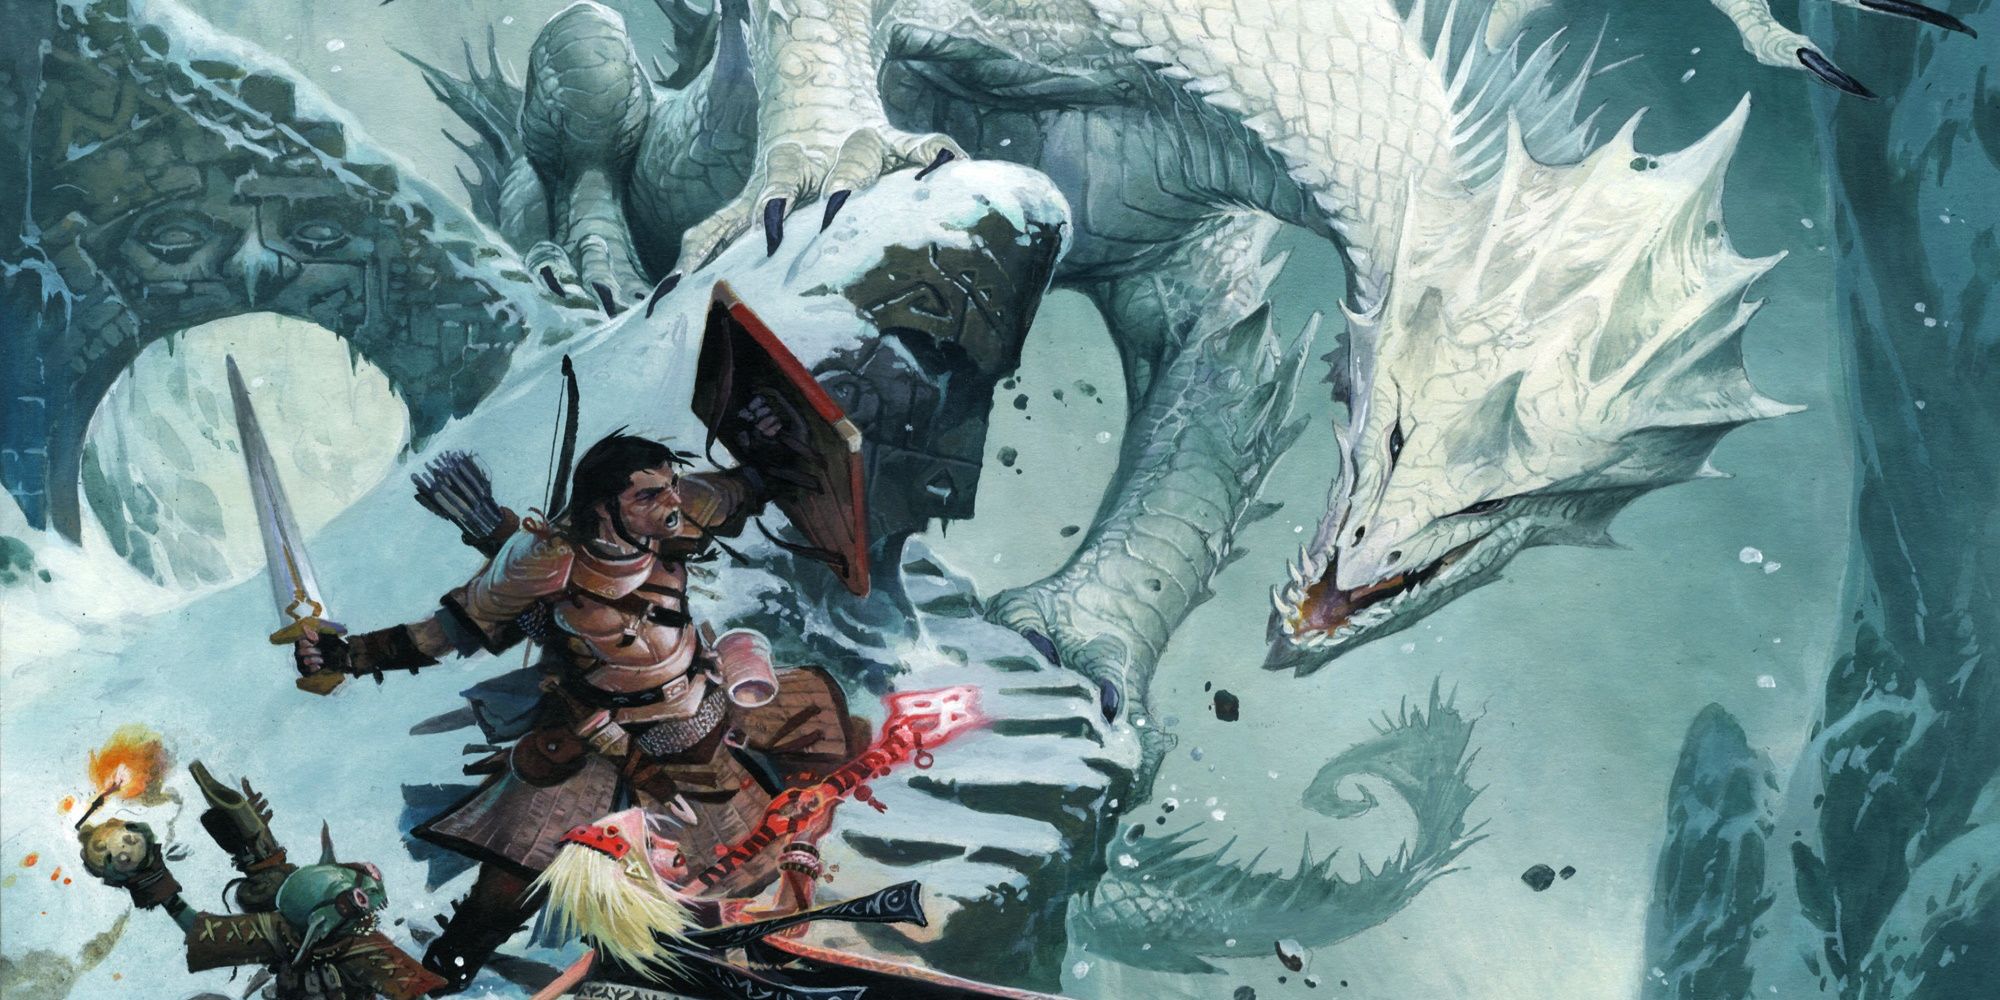 An alchemist and a Fighter battle a white dragon in Pathfinder/DnD